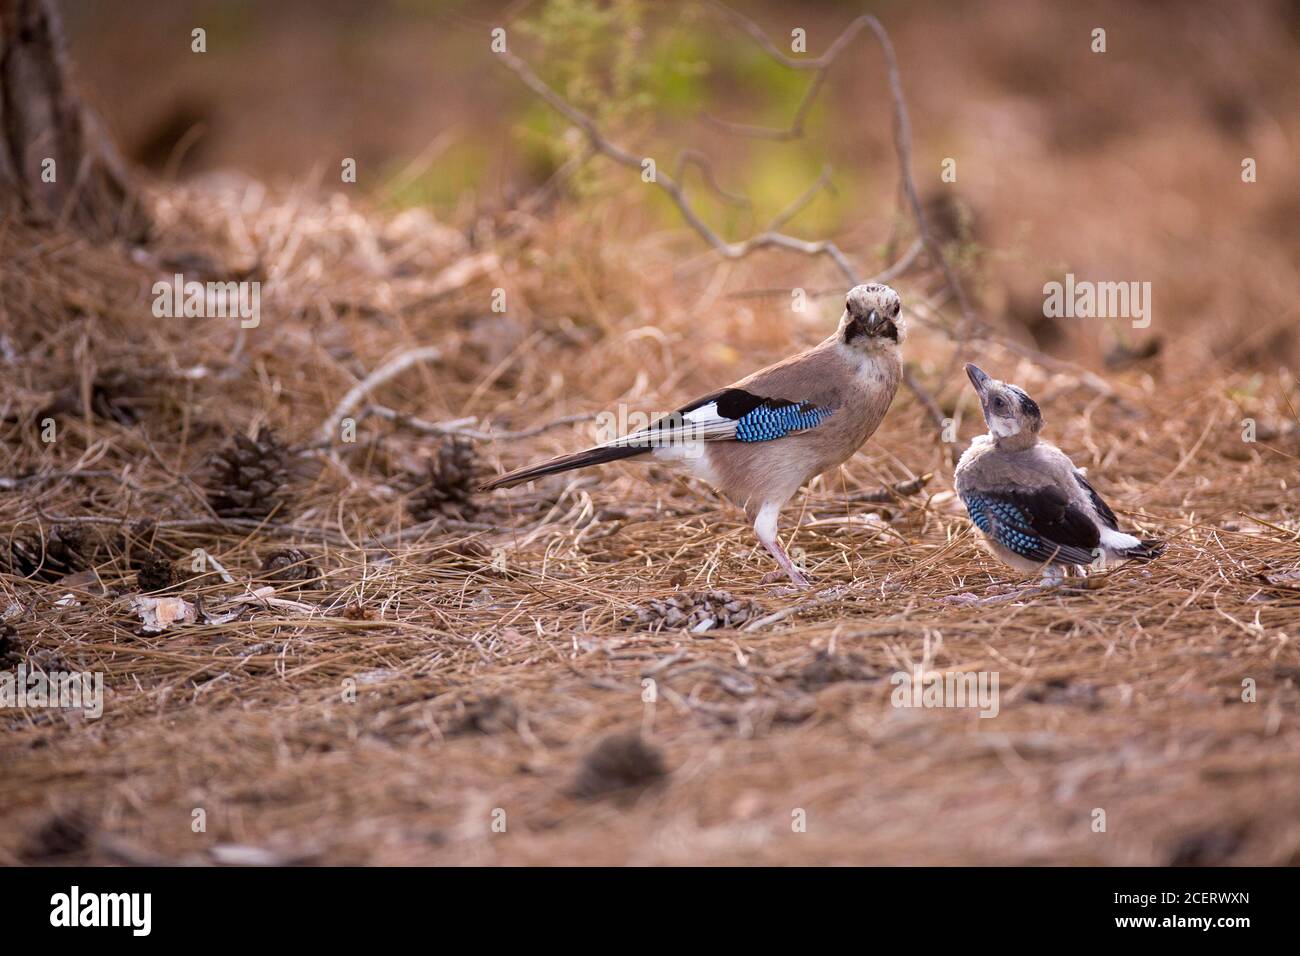 Eurasian jay (Garrulus glandarius) giving flight lessons to a Fledgling on the ground outside of the nest. Photographed in Israel in May Stock Photo